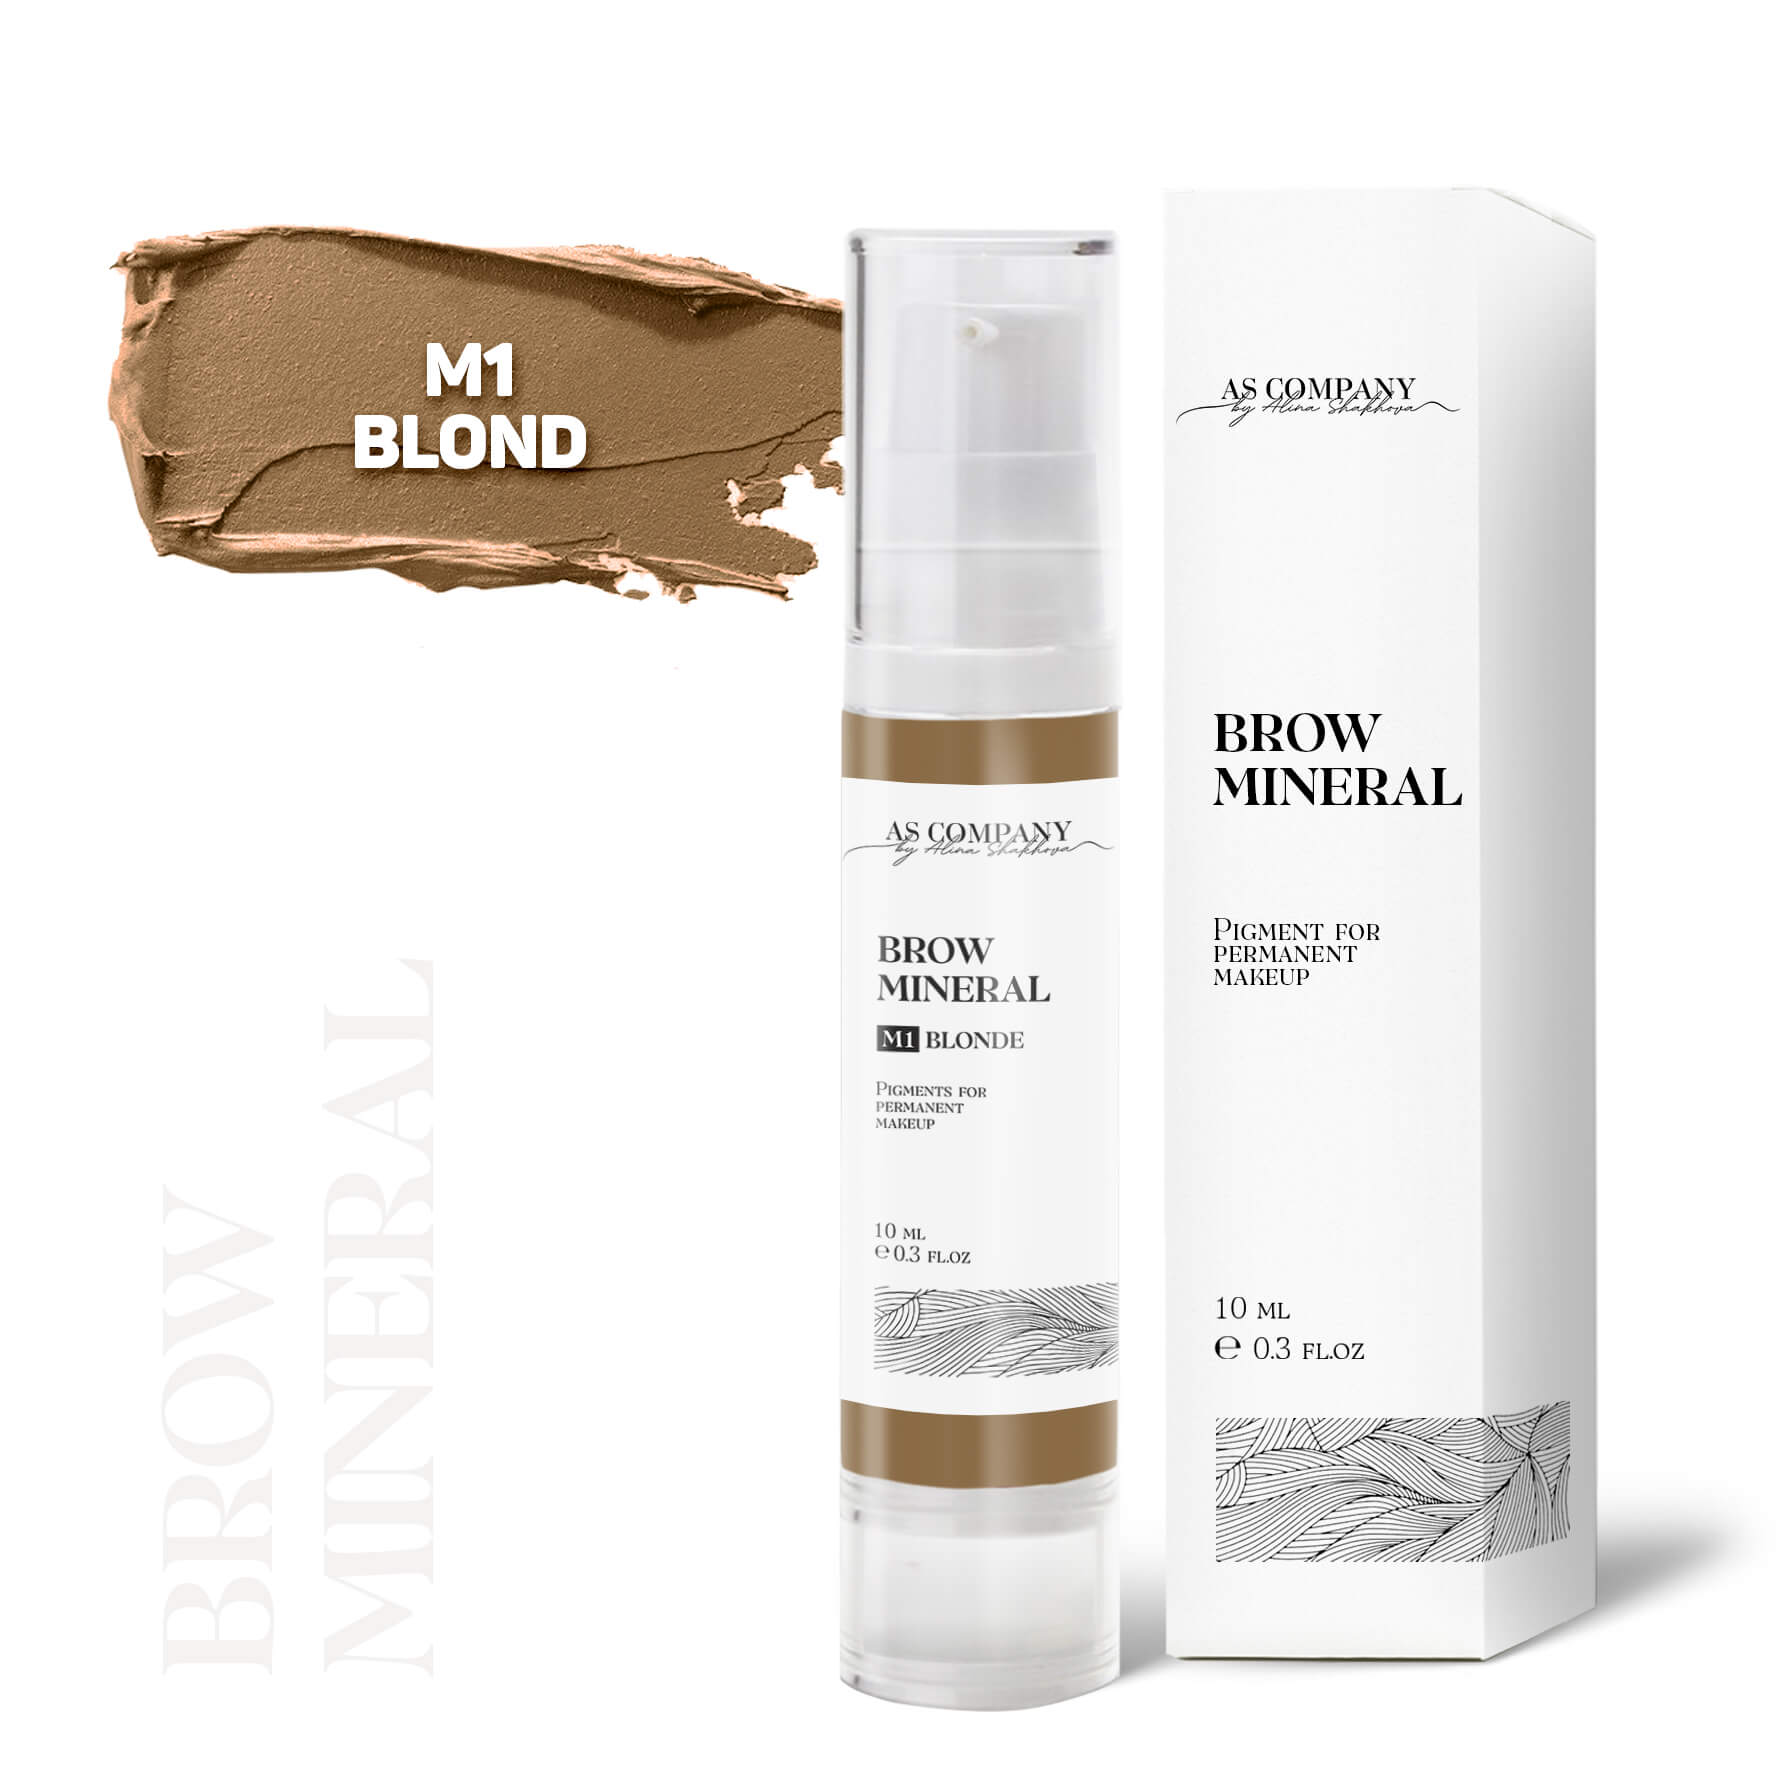 AS Company (Алина Шахова) - Brow Mineral M1 Blond, 10мл